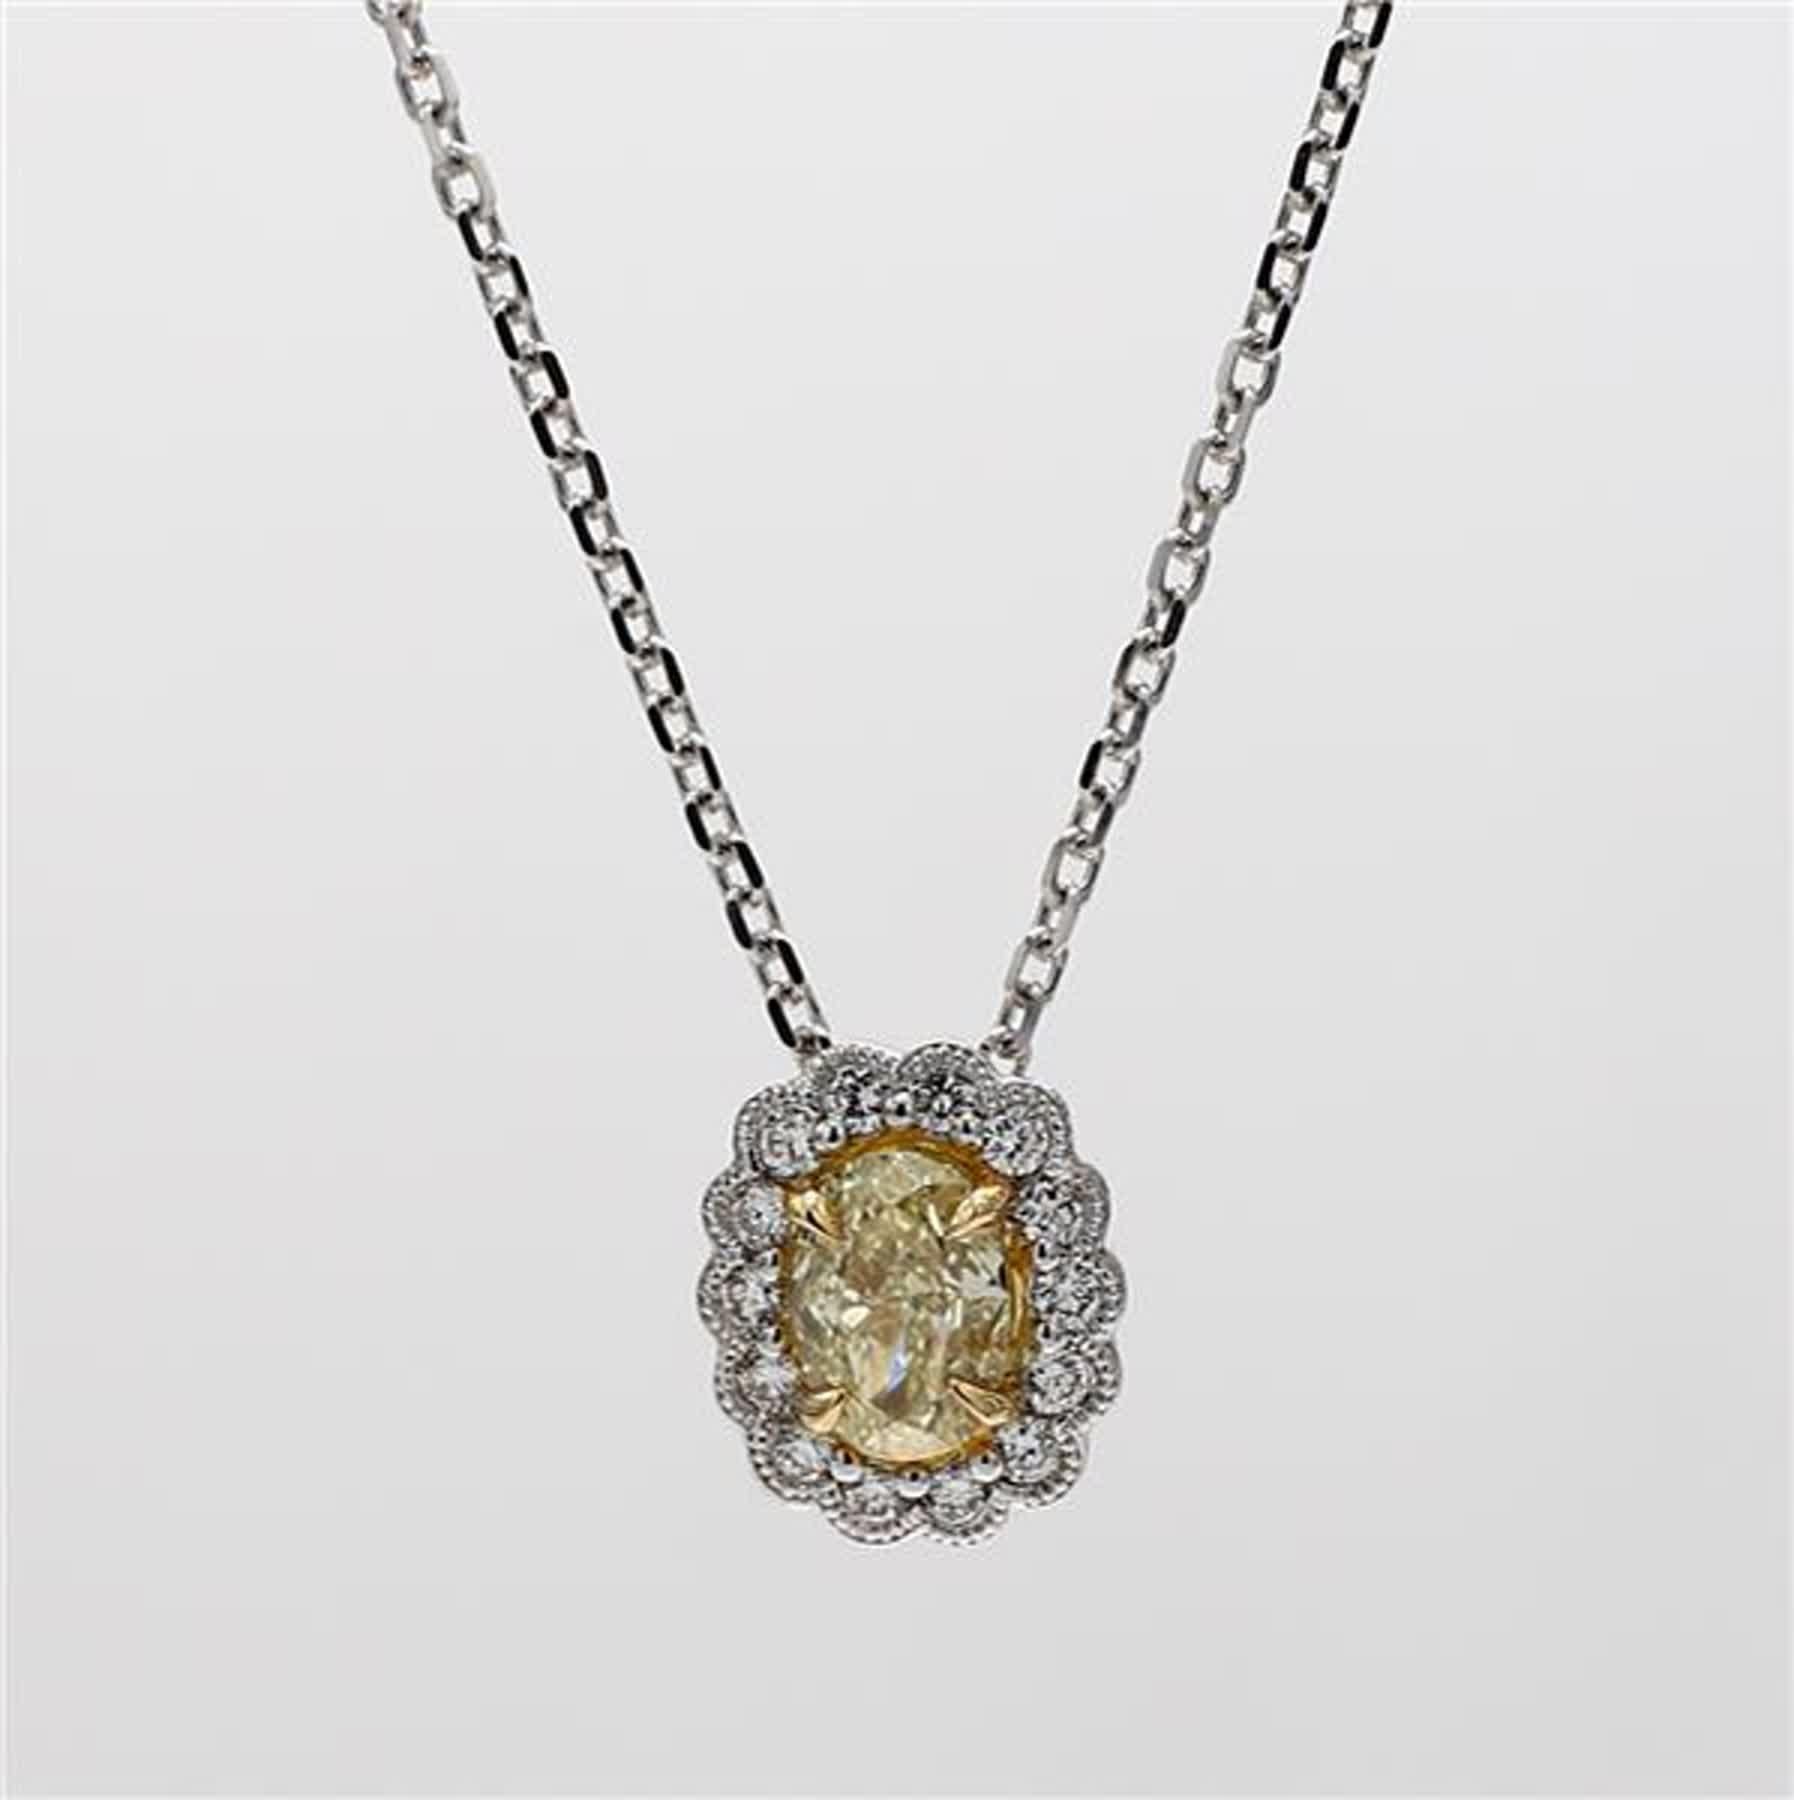 RareGemWorld's classic diamond pendant. Mounted in a beautiful 18K Yellow and White Gold setting with a natural oval cut yellow diamond. The yellow diamond is surrounded by natural round white diamond melee. This pendant is guaranteed to impress and